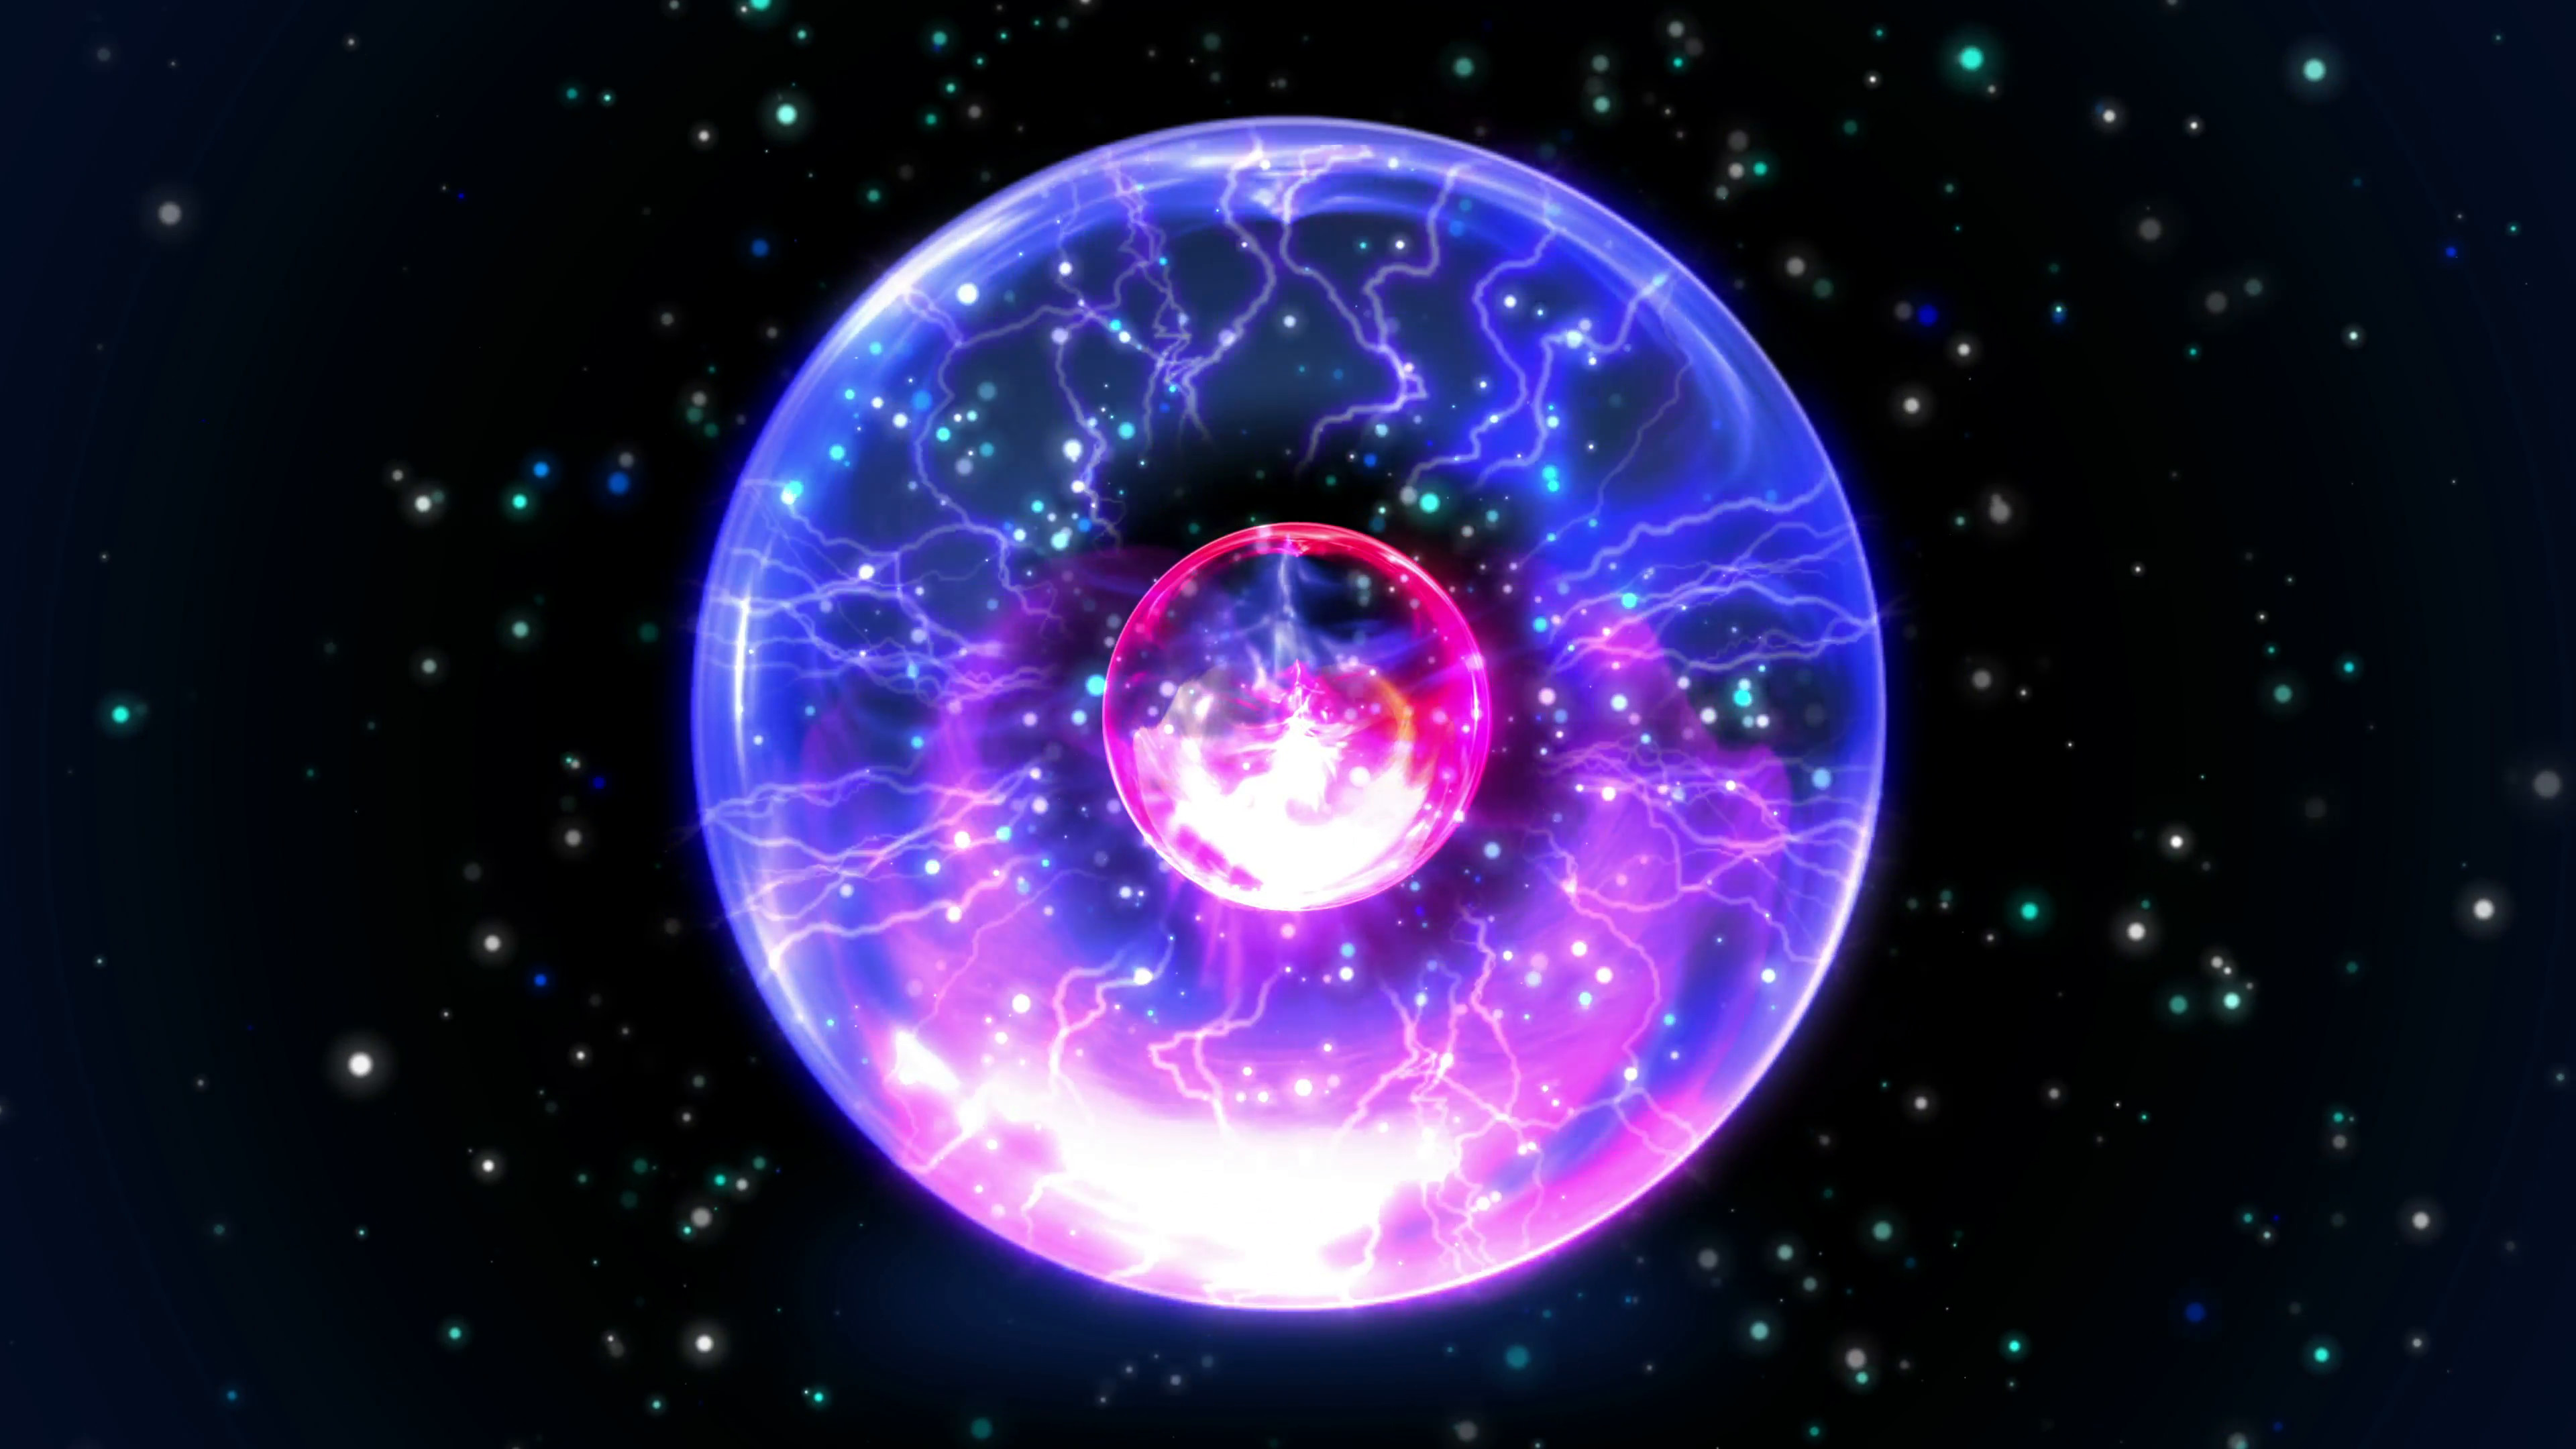 3840x2160 Subscription Library Seamless Plasma ball, black hole or wormhole, and warp  zone animation in intergalactic space